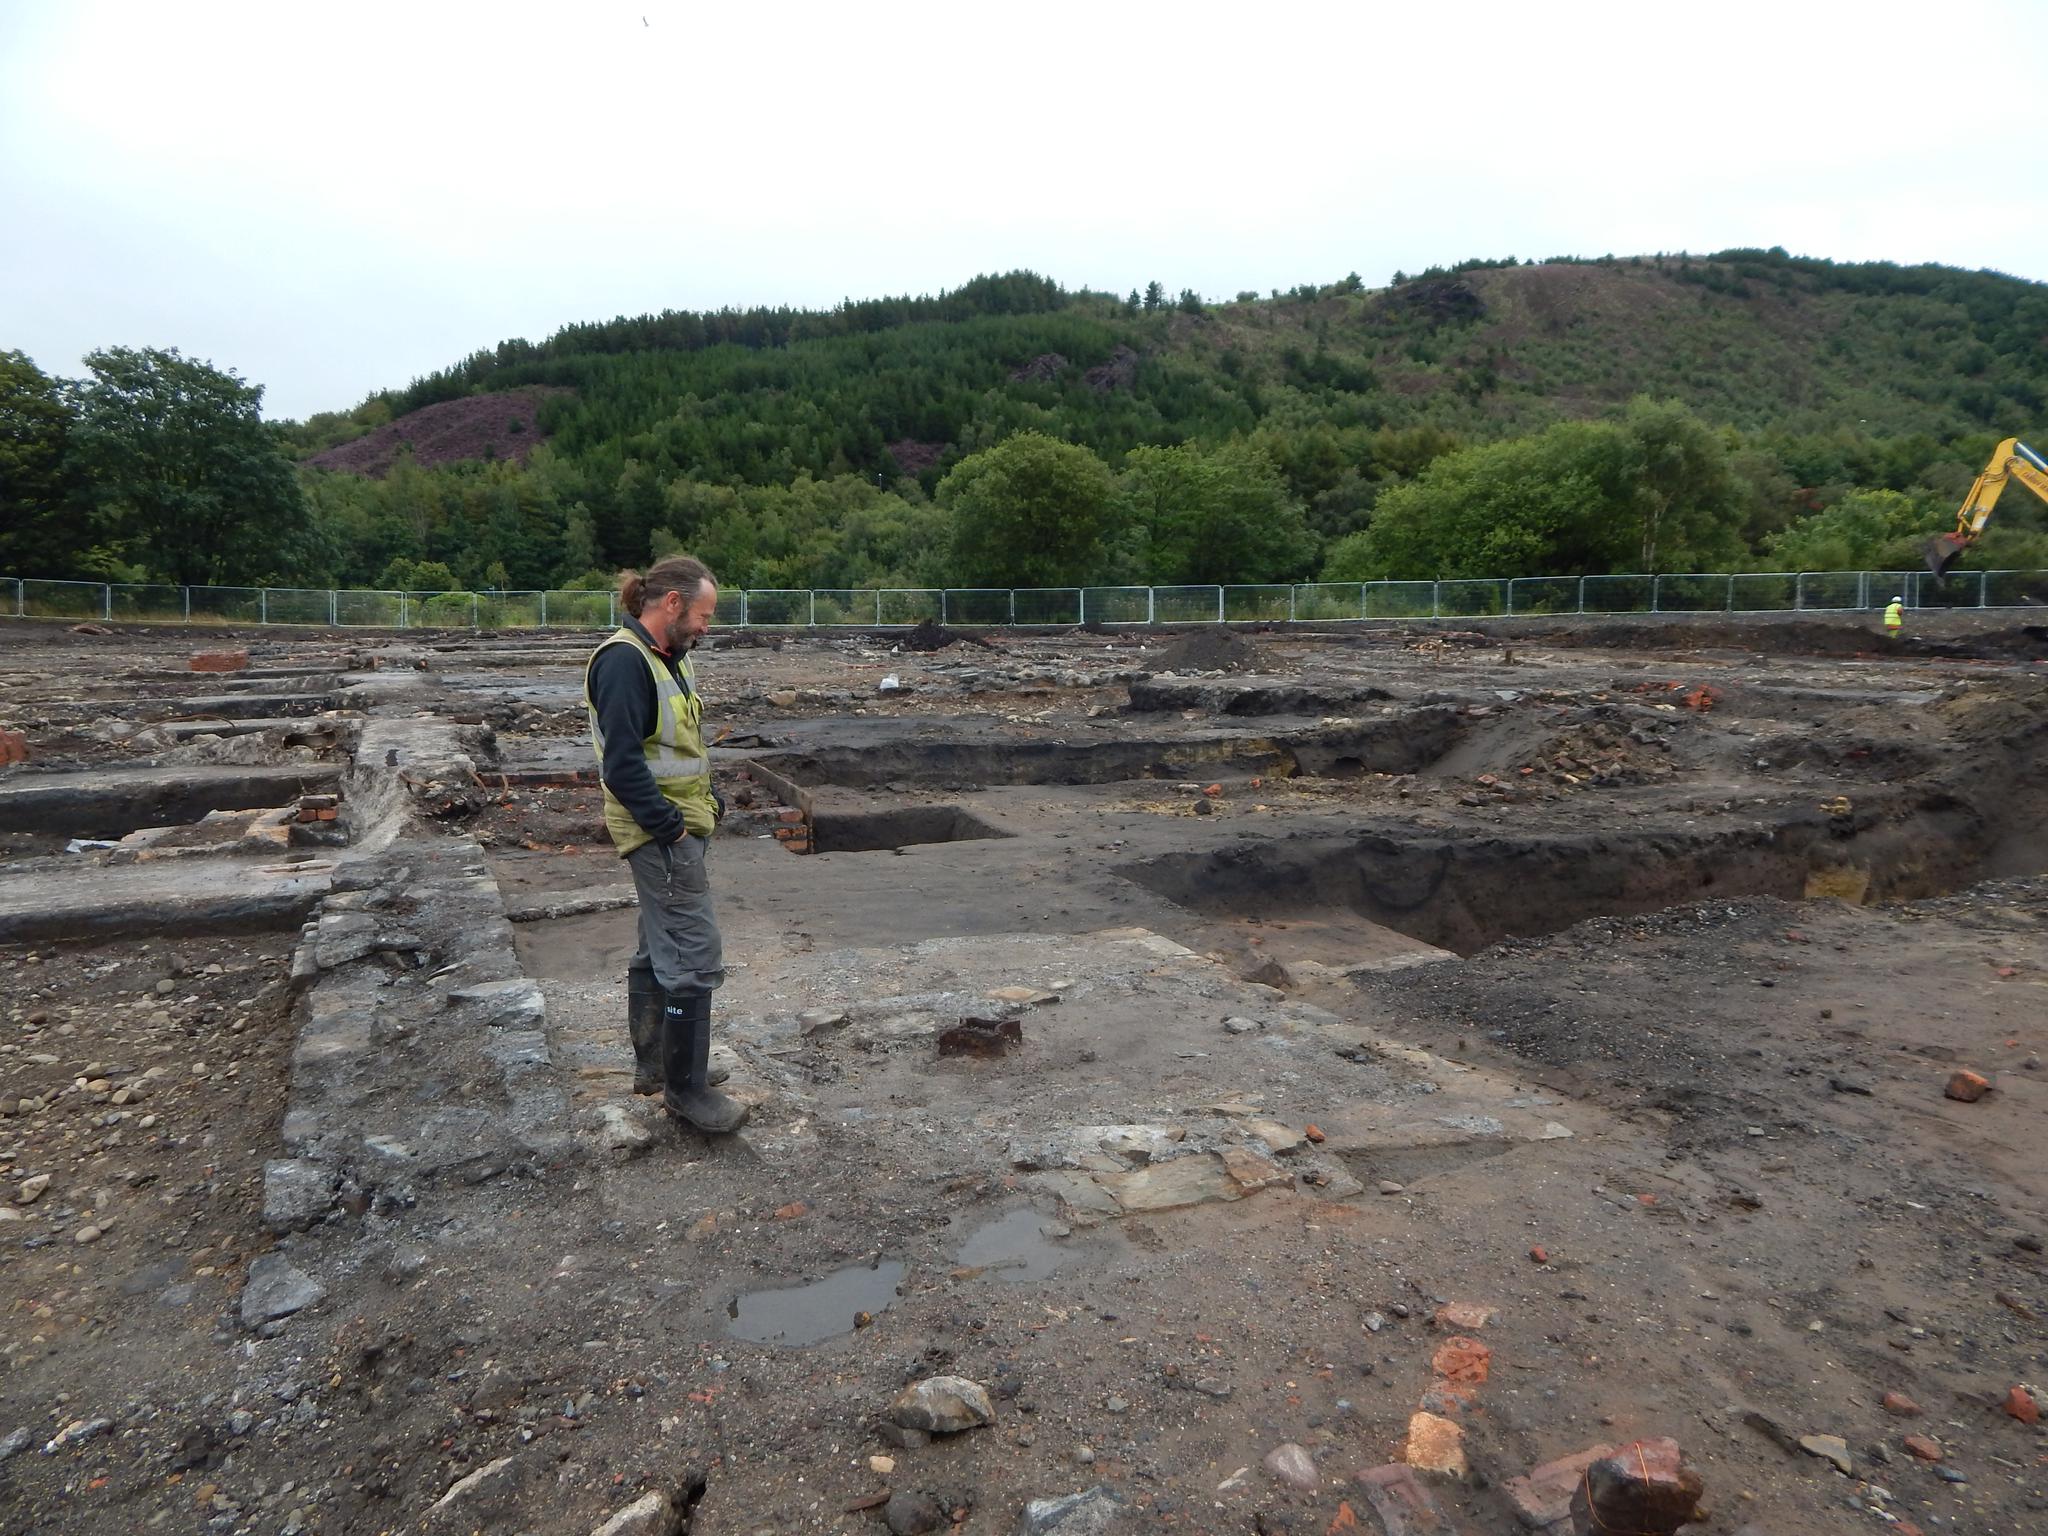 Excavation at Hafod foundry, photograph